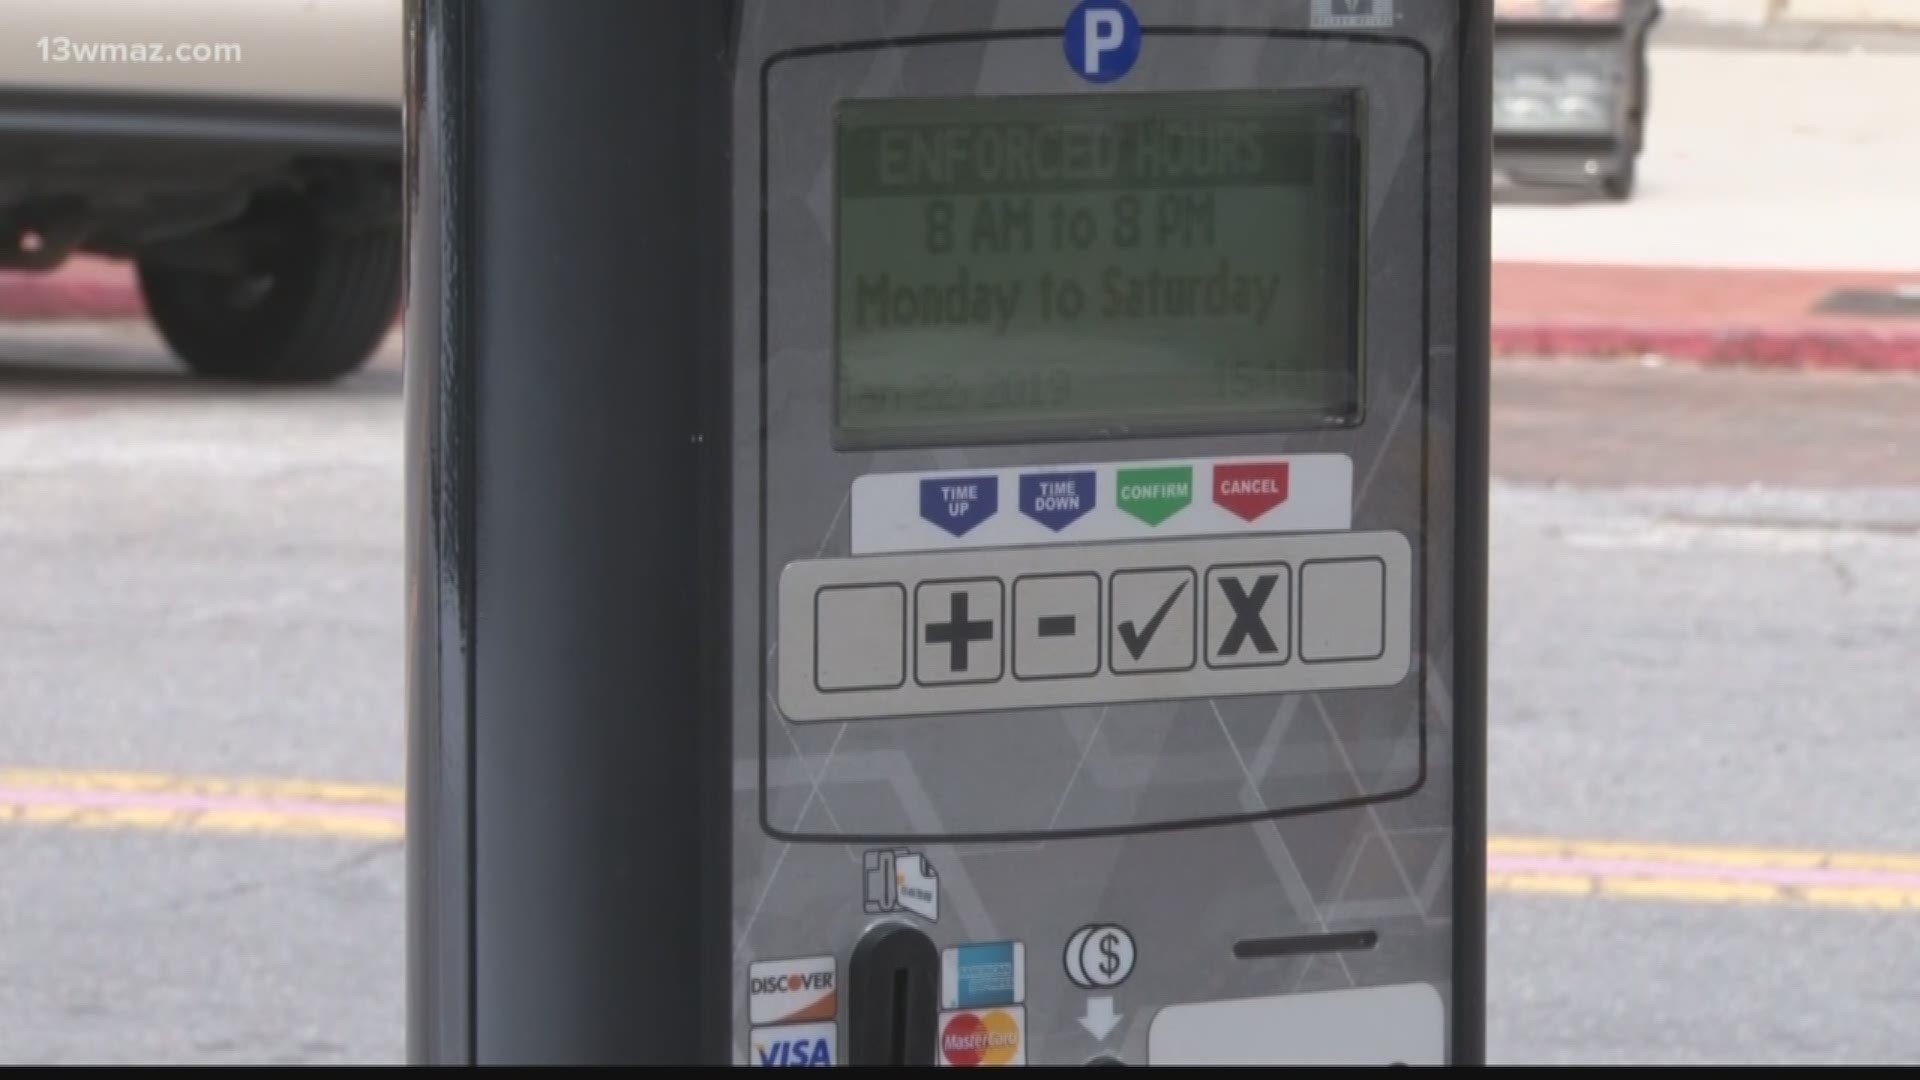 Downtown Macon parking meters in the red